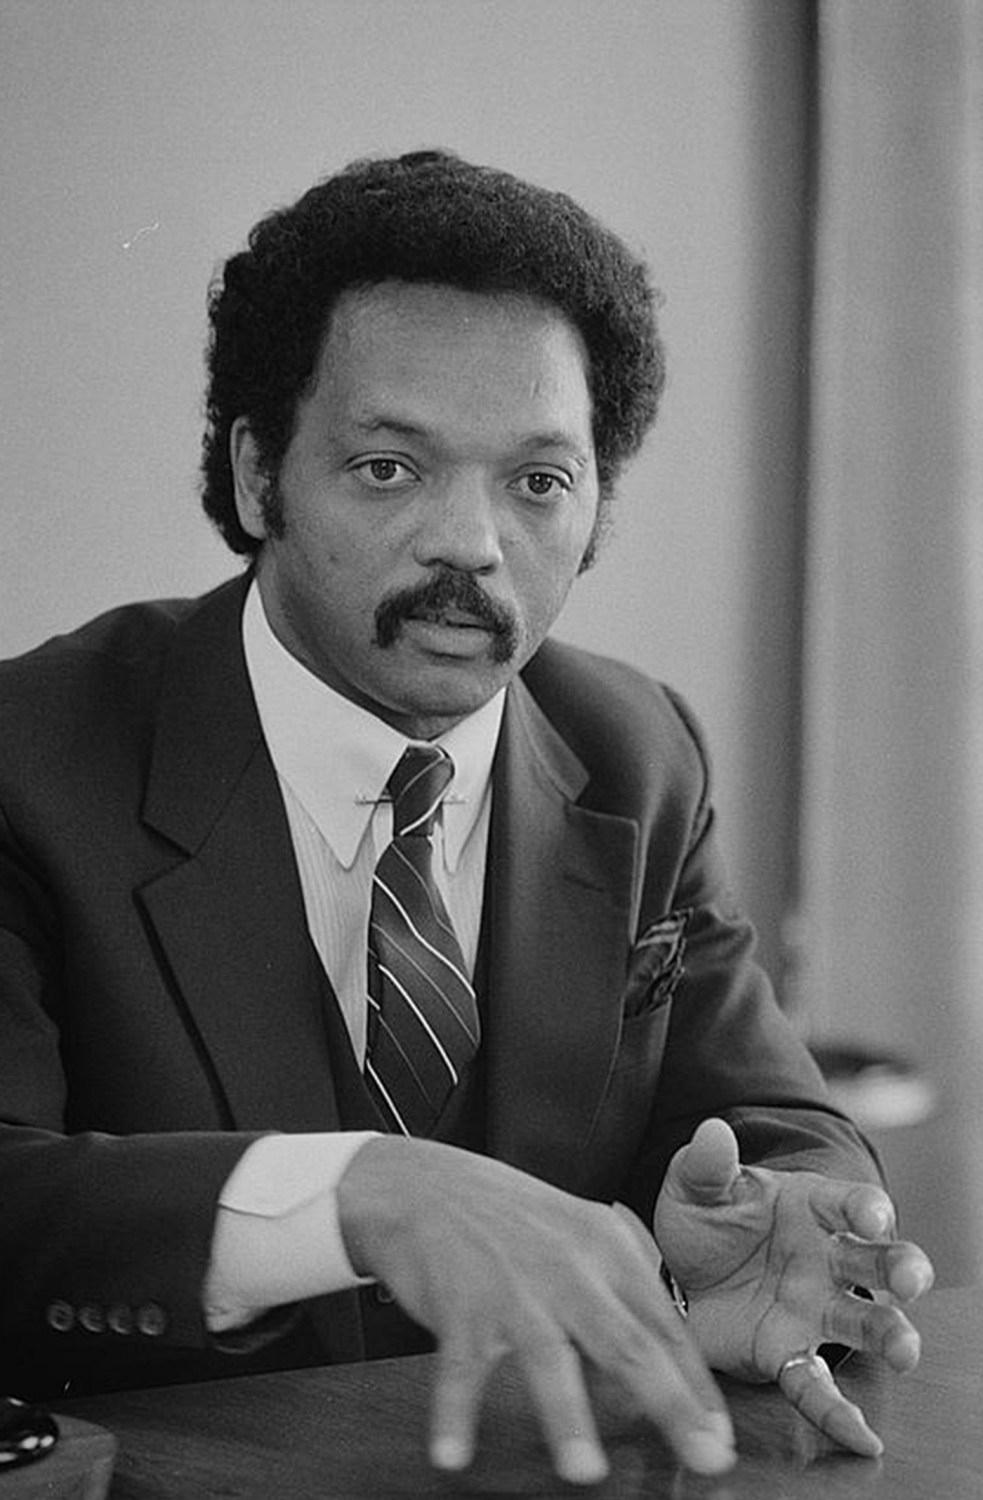 Jesse Jackson was only the second African American to mount a national campaign for the presidency. His work as a civil rights activist and Baptist minister garnered him a significant following in the African American community, but never enough to secure the Democratic nomination. His Warren K. Leffler, “IVU w/ [i.e., interview with] Rev. Jesse Jackson,” July 1, 1983. Library of Congress, http://www.loc.gov/pictures/item/2003688127/. 